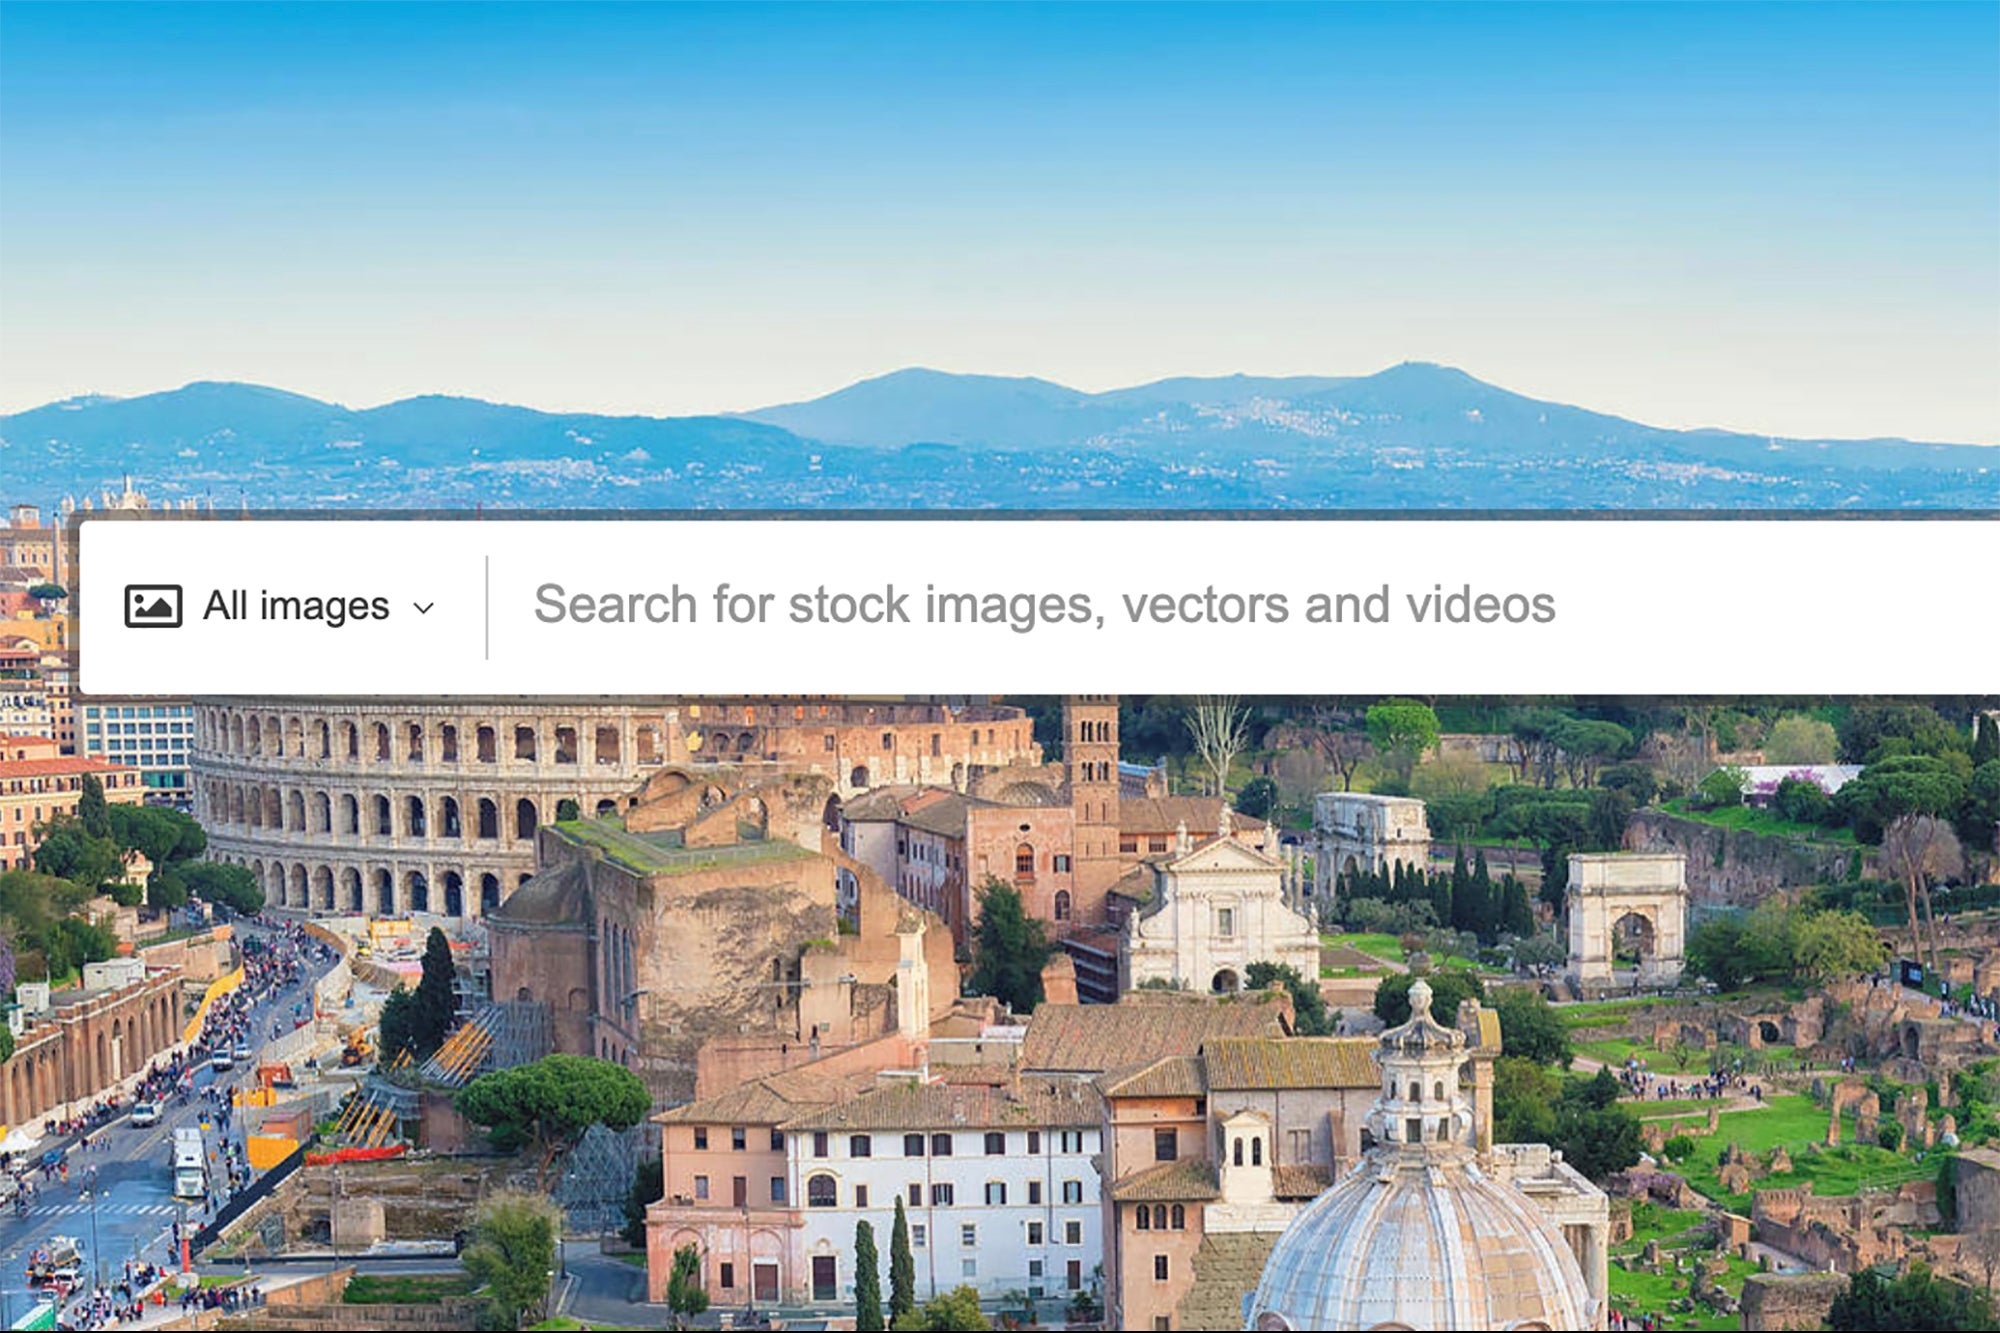 Take 25 Percent Off High-Quality Stock Photos with This Exclusive Offer